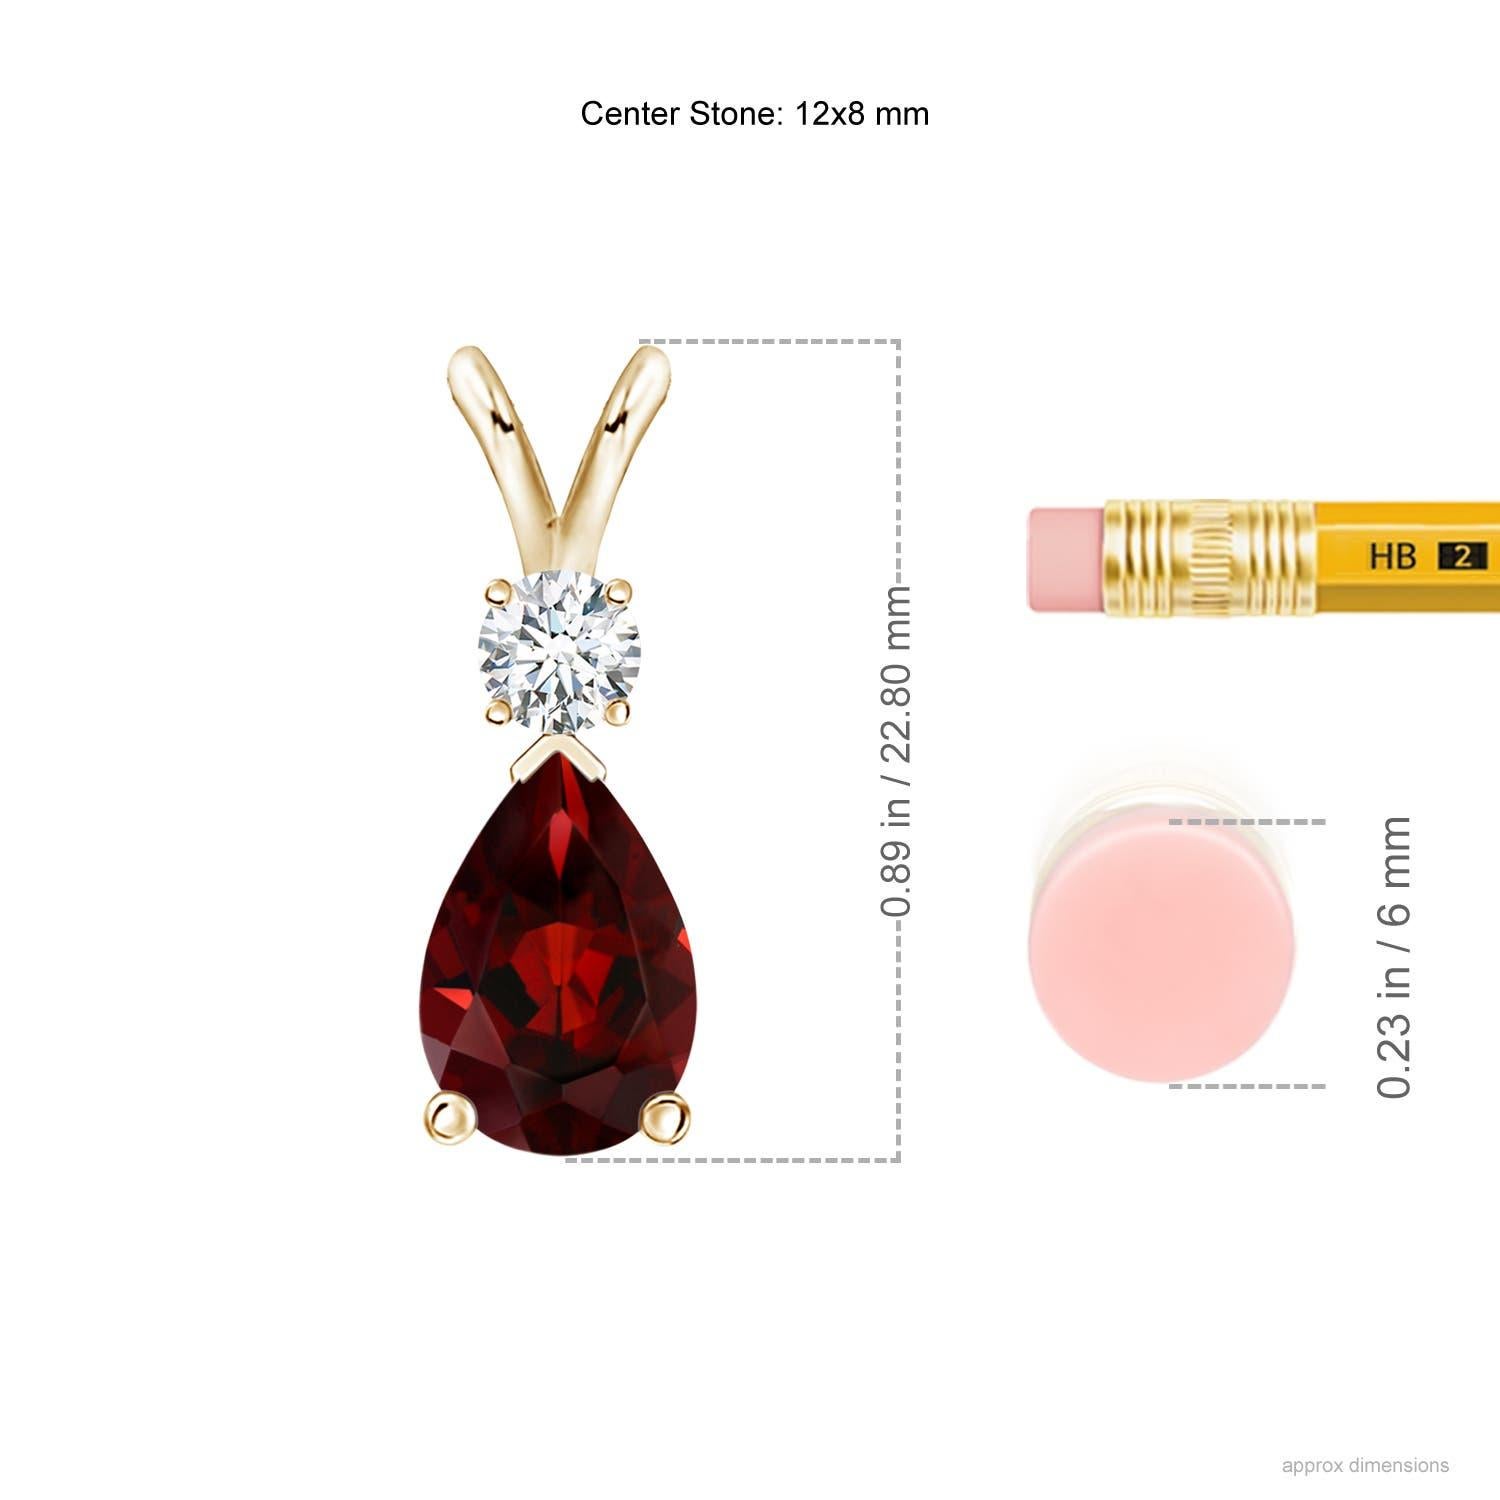 A pear-shaped intense red garnet is secured in a prong setting and embellished with a diamond accent on the top. Simple yet stunning, this teardrop garnet pendant with V bale is sculpted in 14k yellow gold.